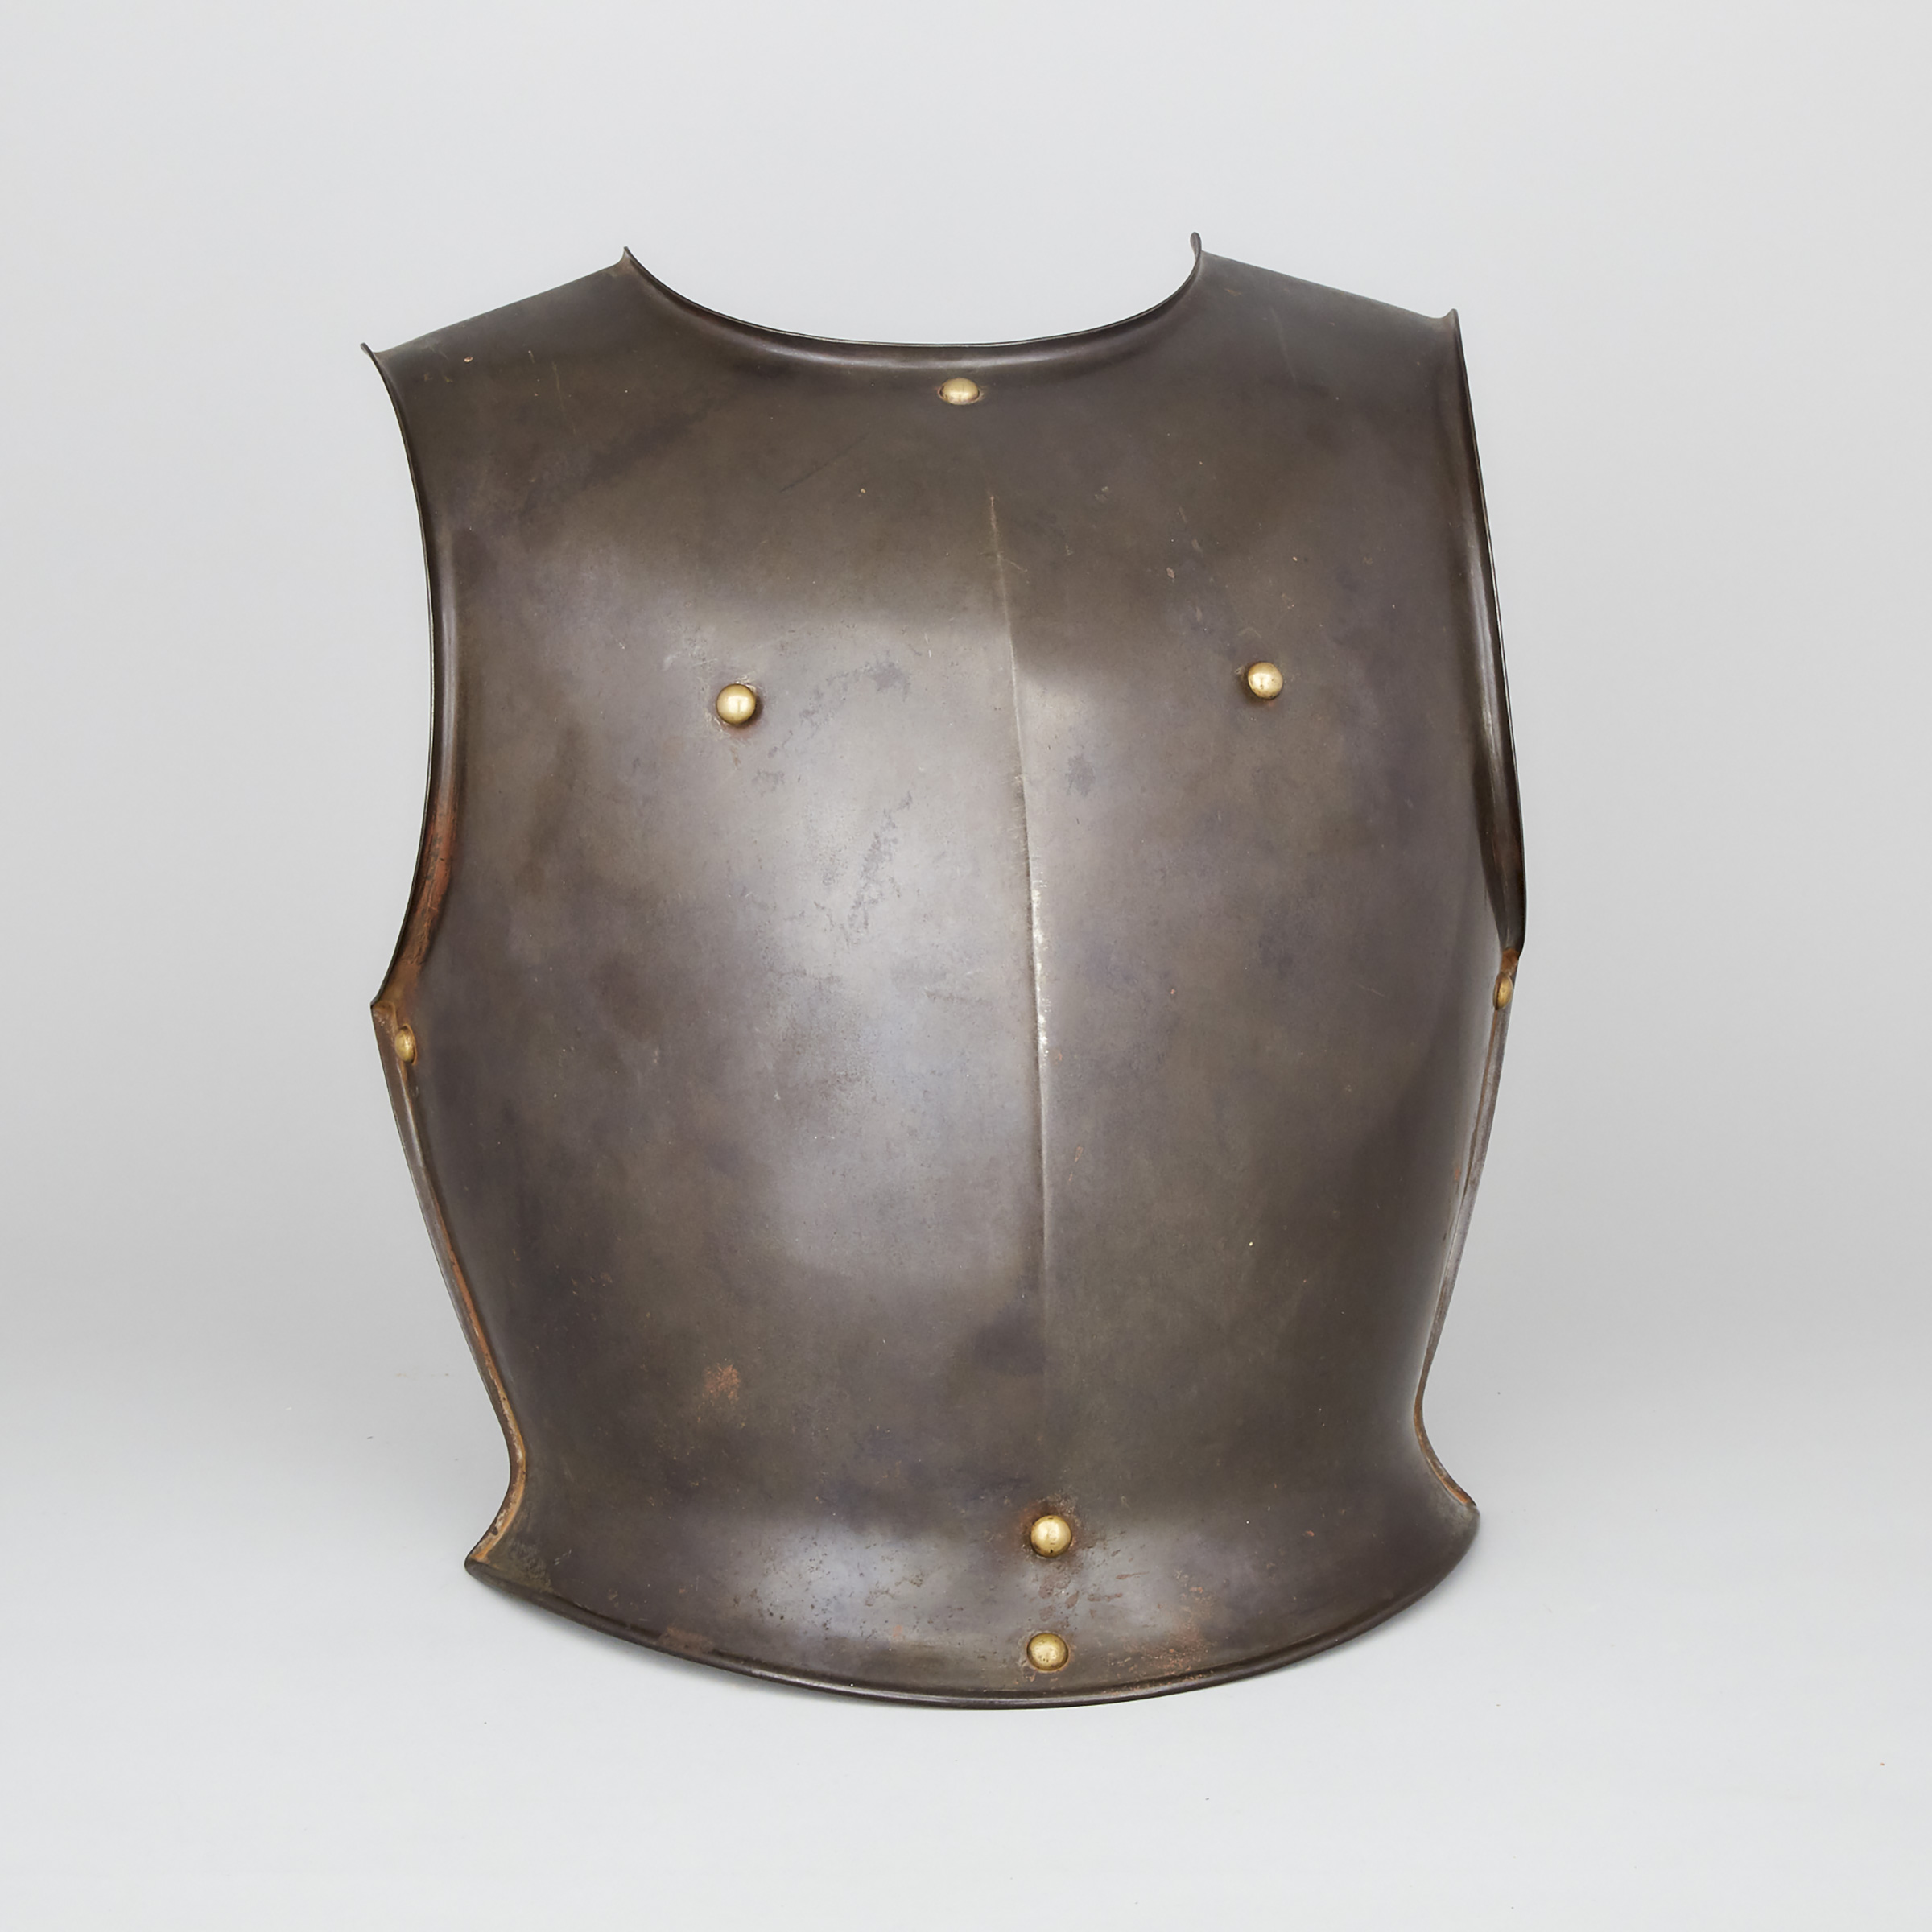 French Cuirassier's Breastplate, early 19th century